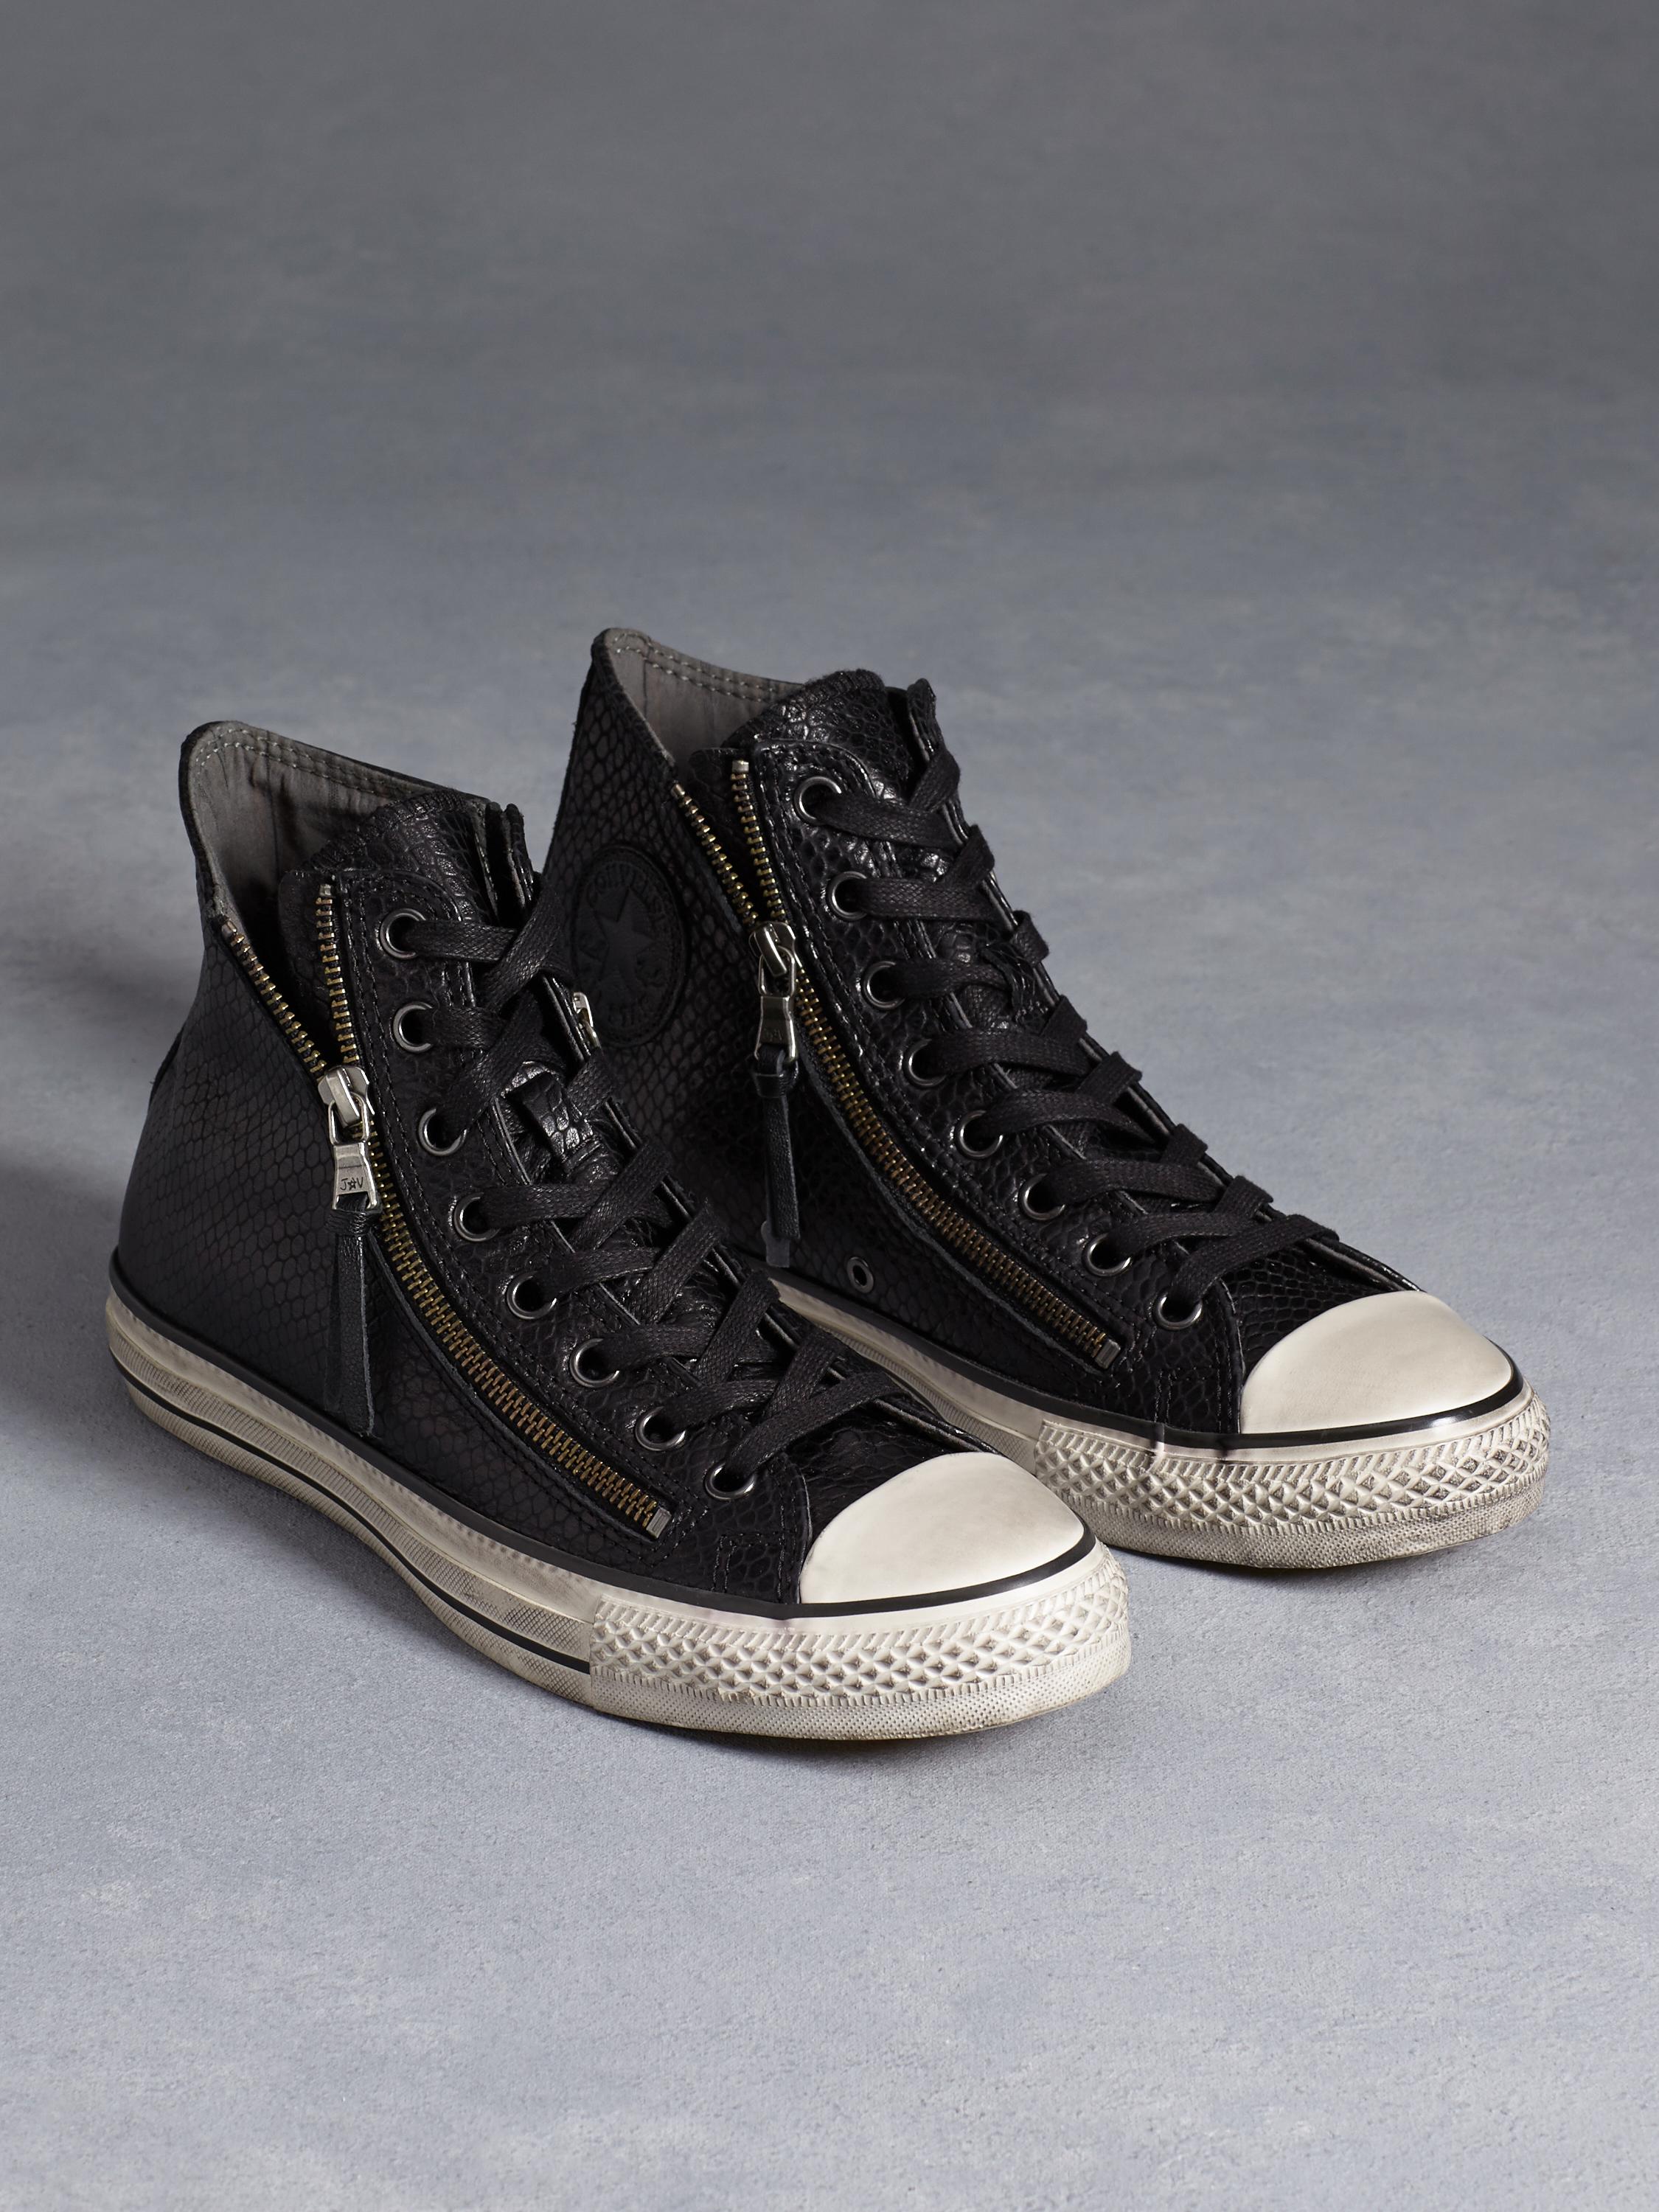 BLACK SNAKE ALL STAR LEATHER DOUBLE ZIP 